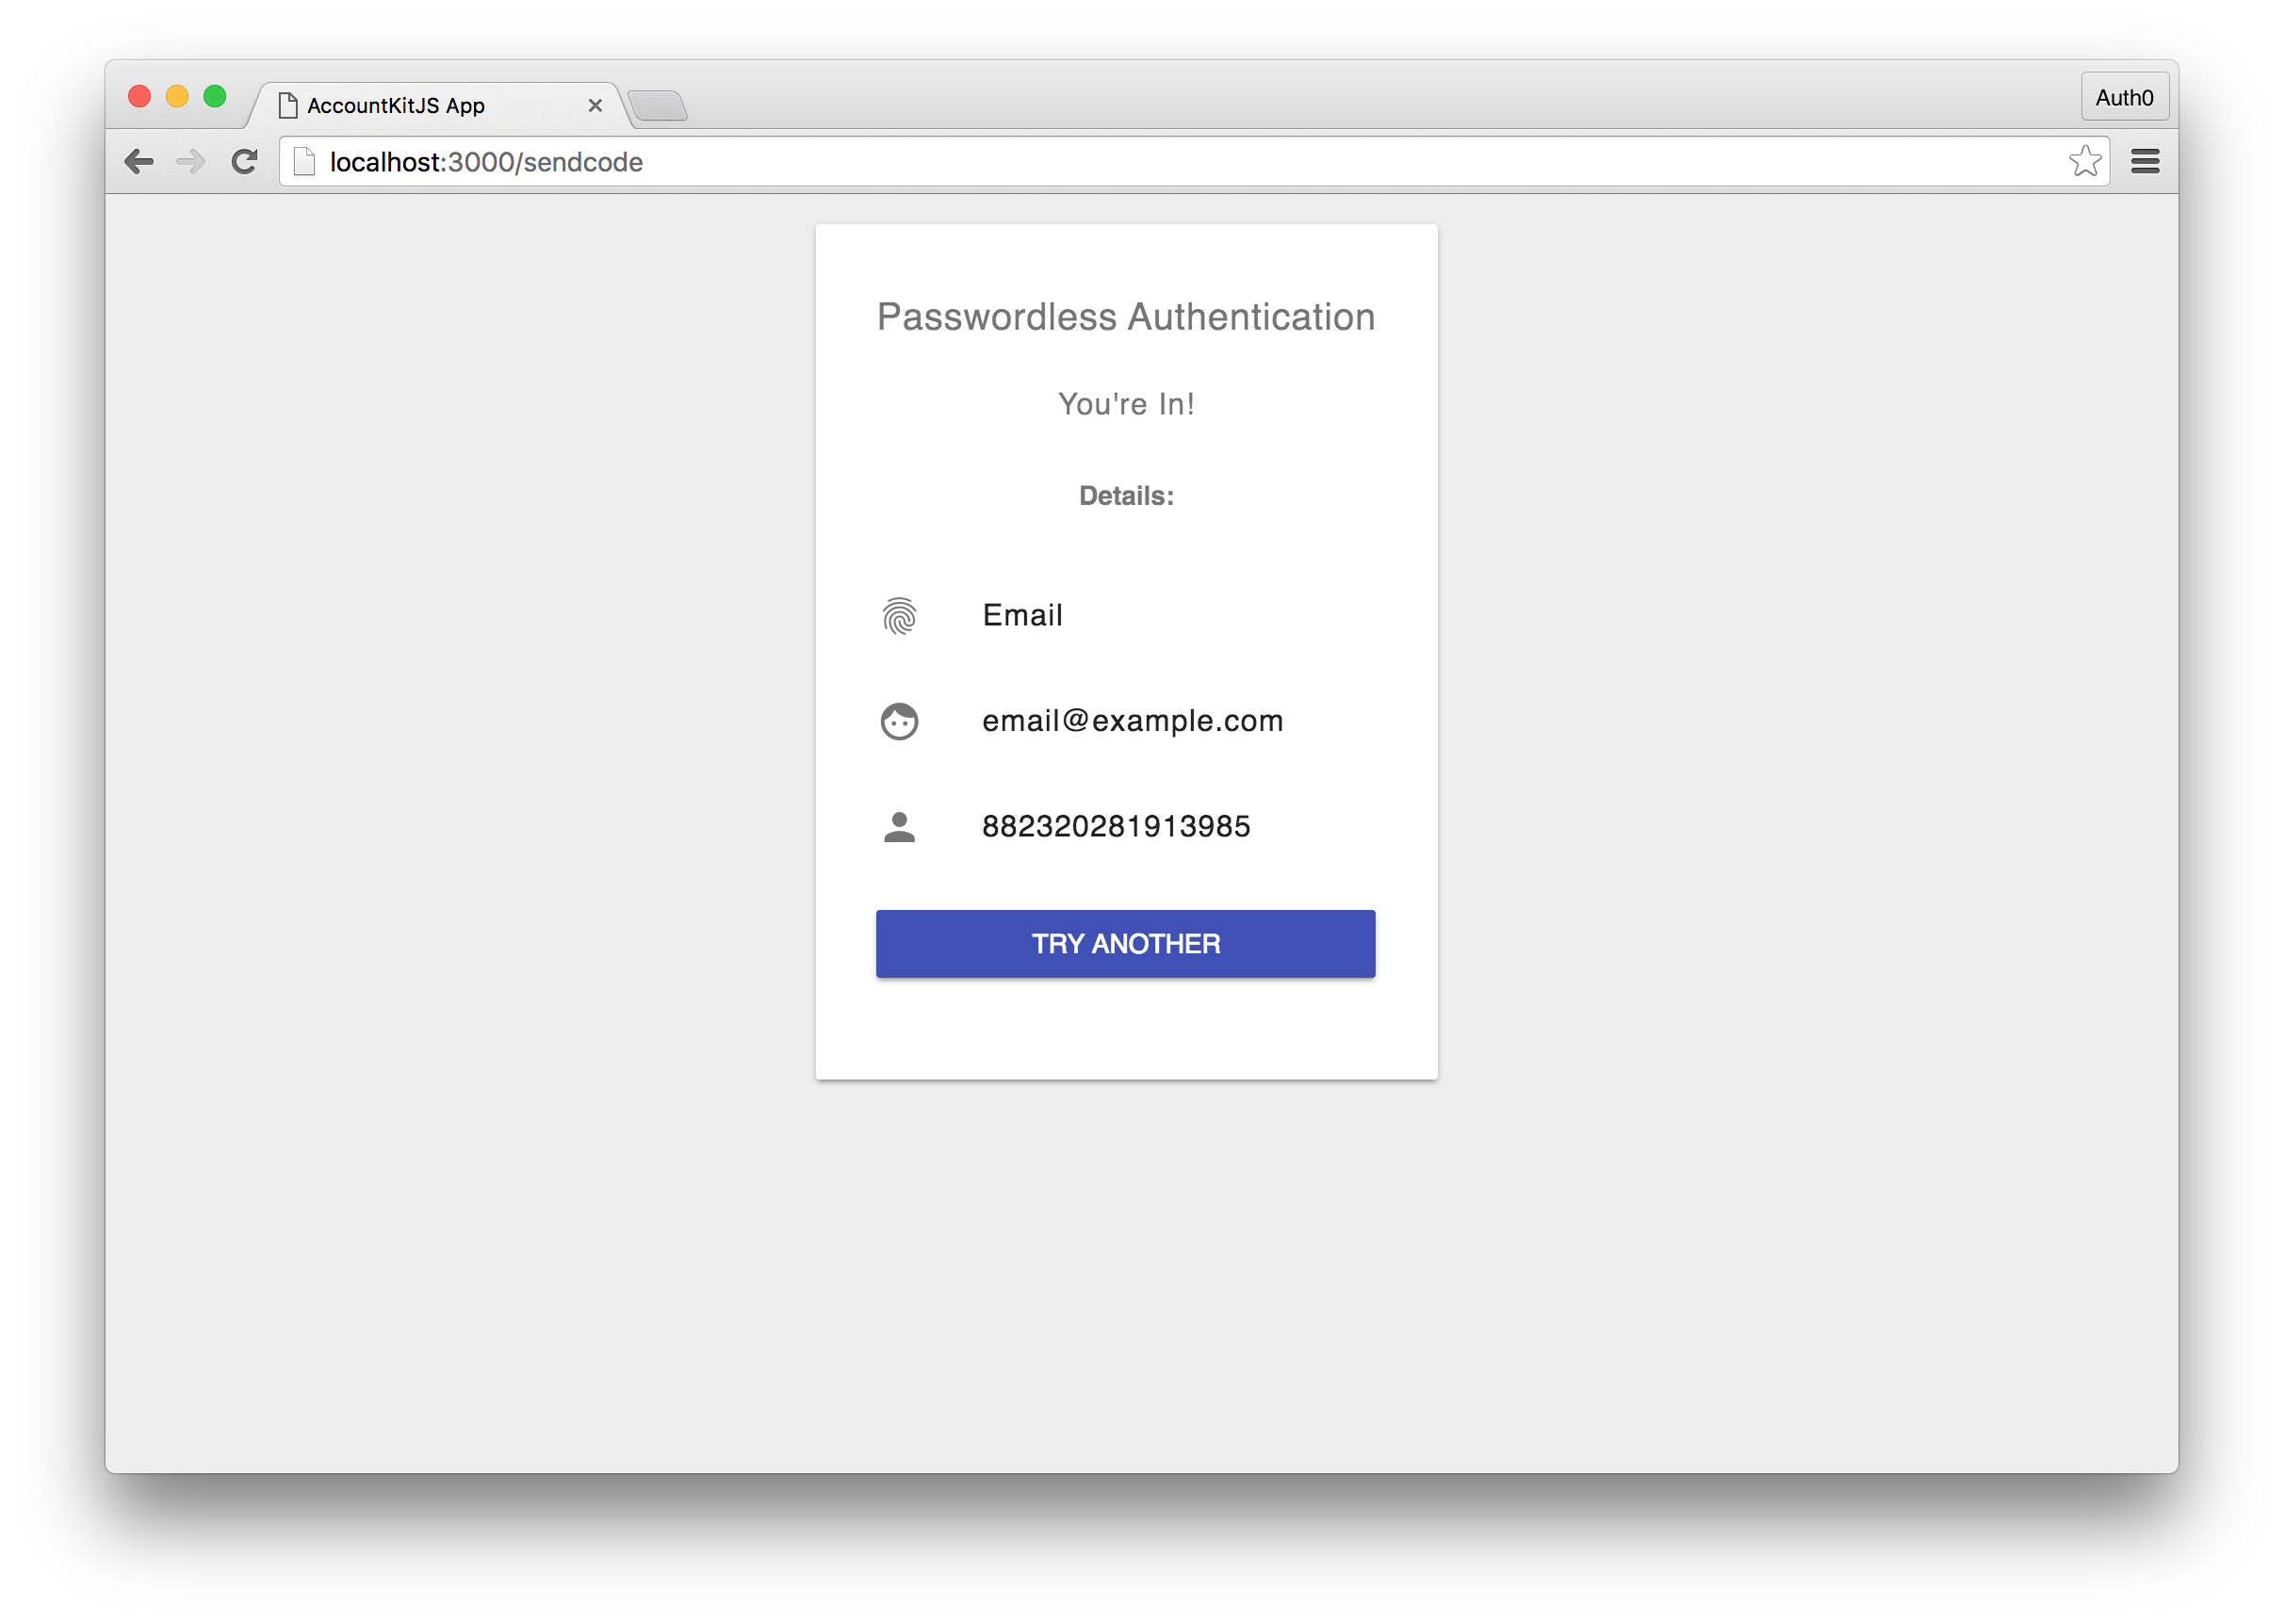 Sample App Authenticated Screen